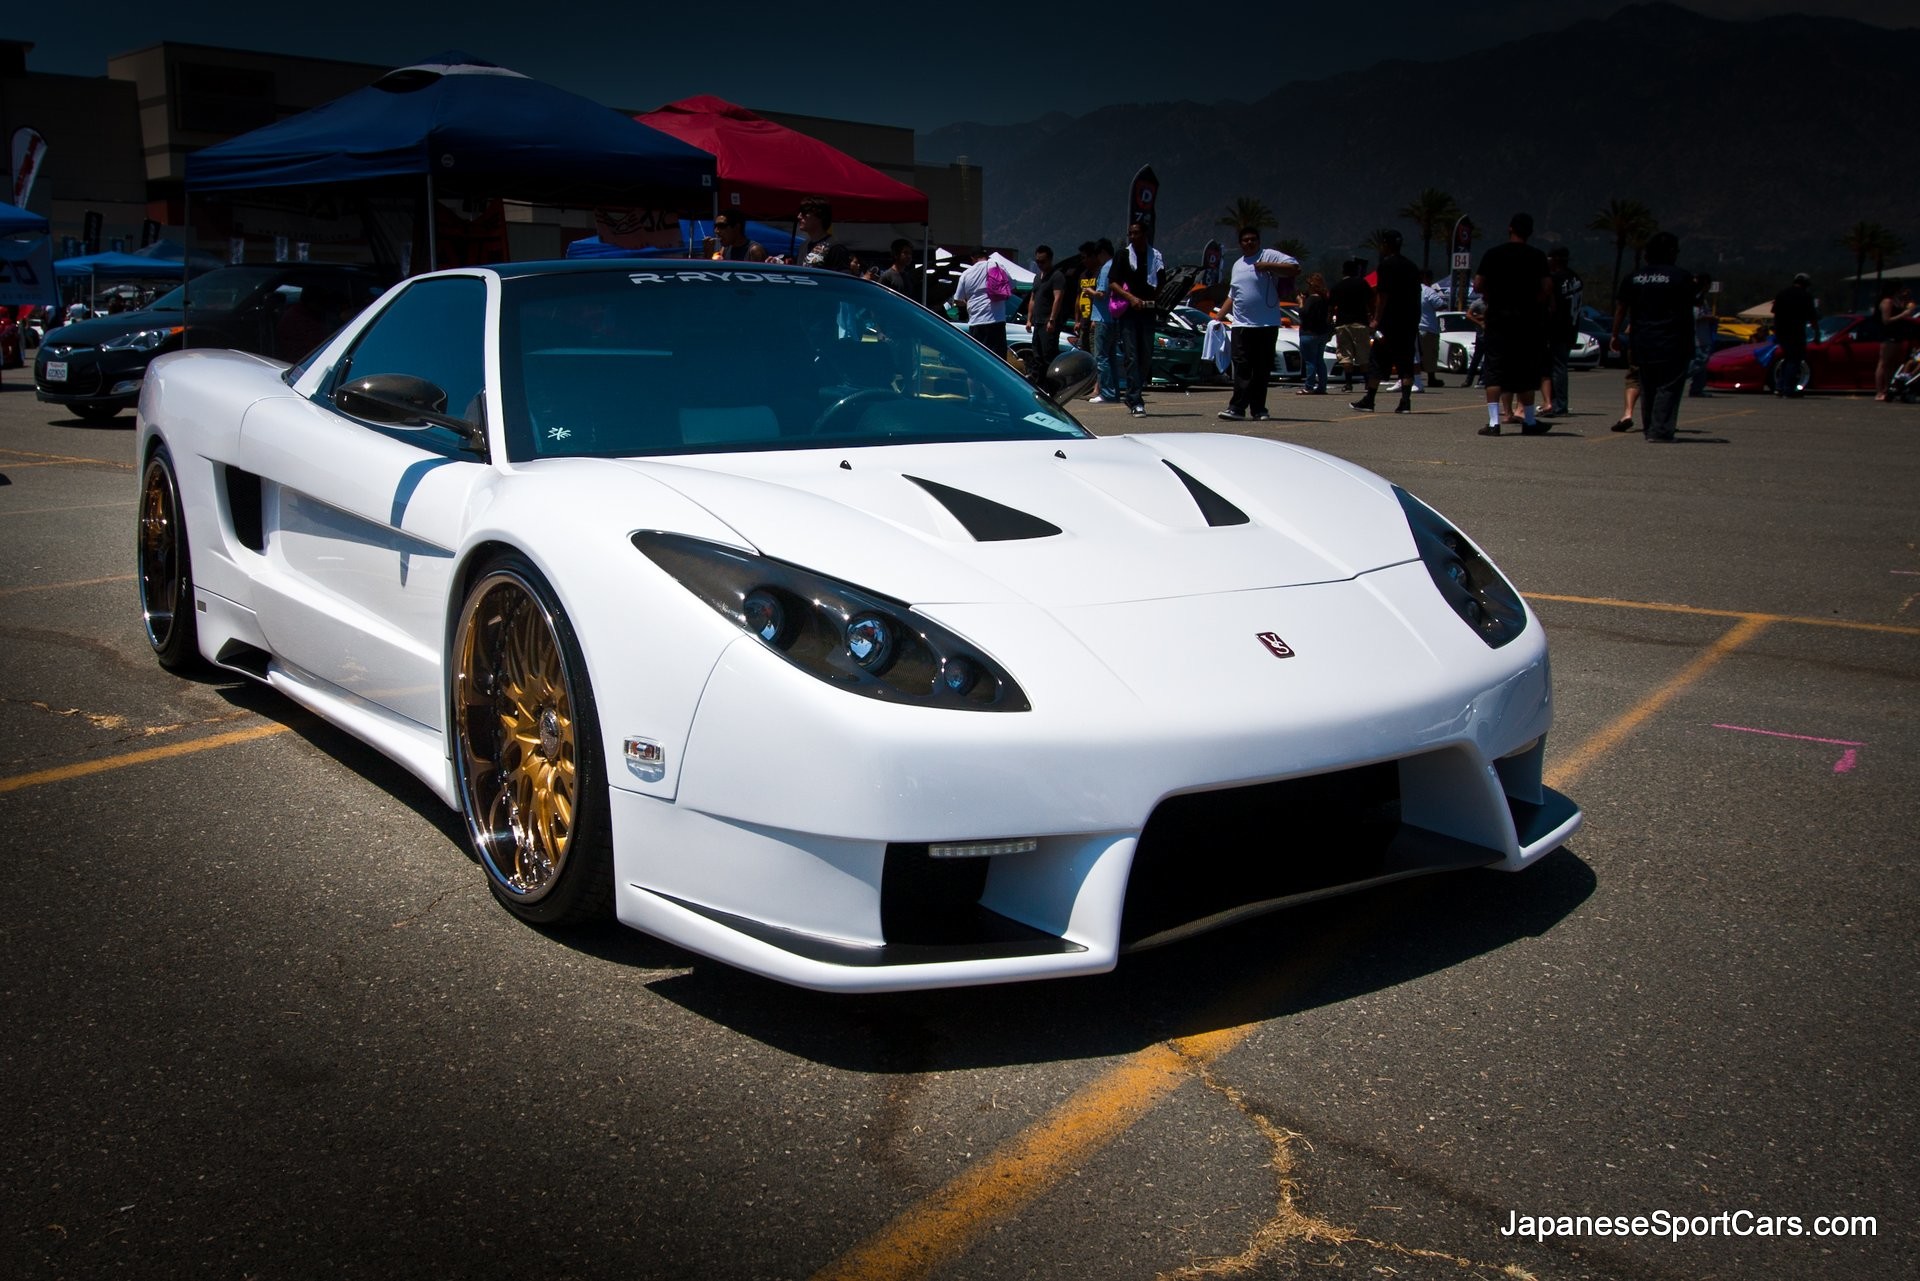 1920x1281 1991 Acura NSX with Veilside Fortune NSX Body Kit - Picture Number: 585711